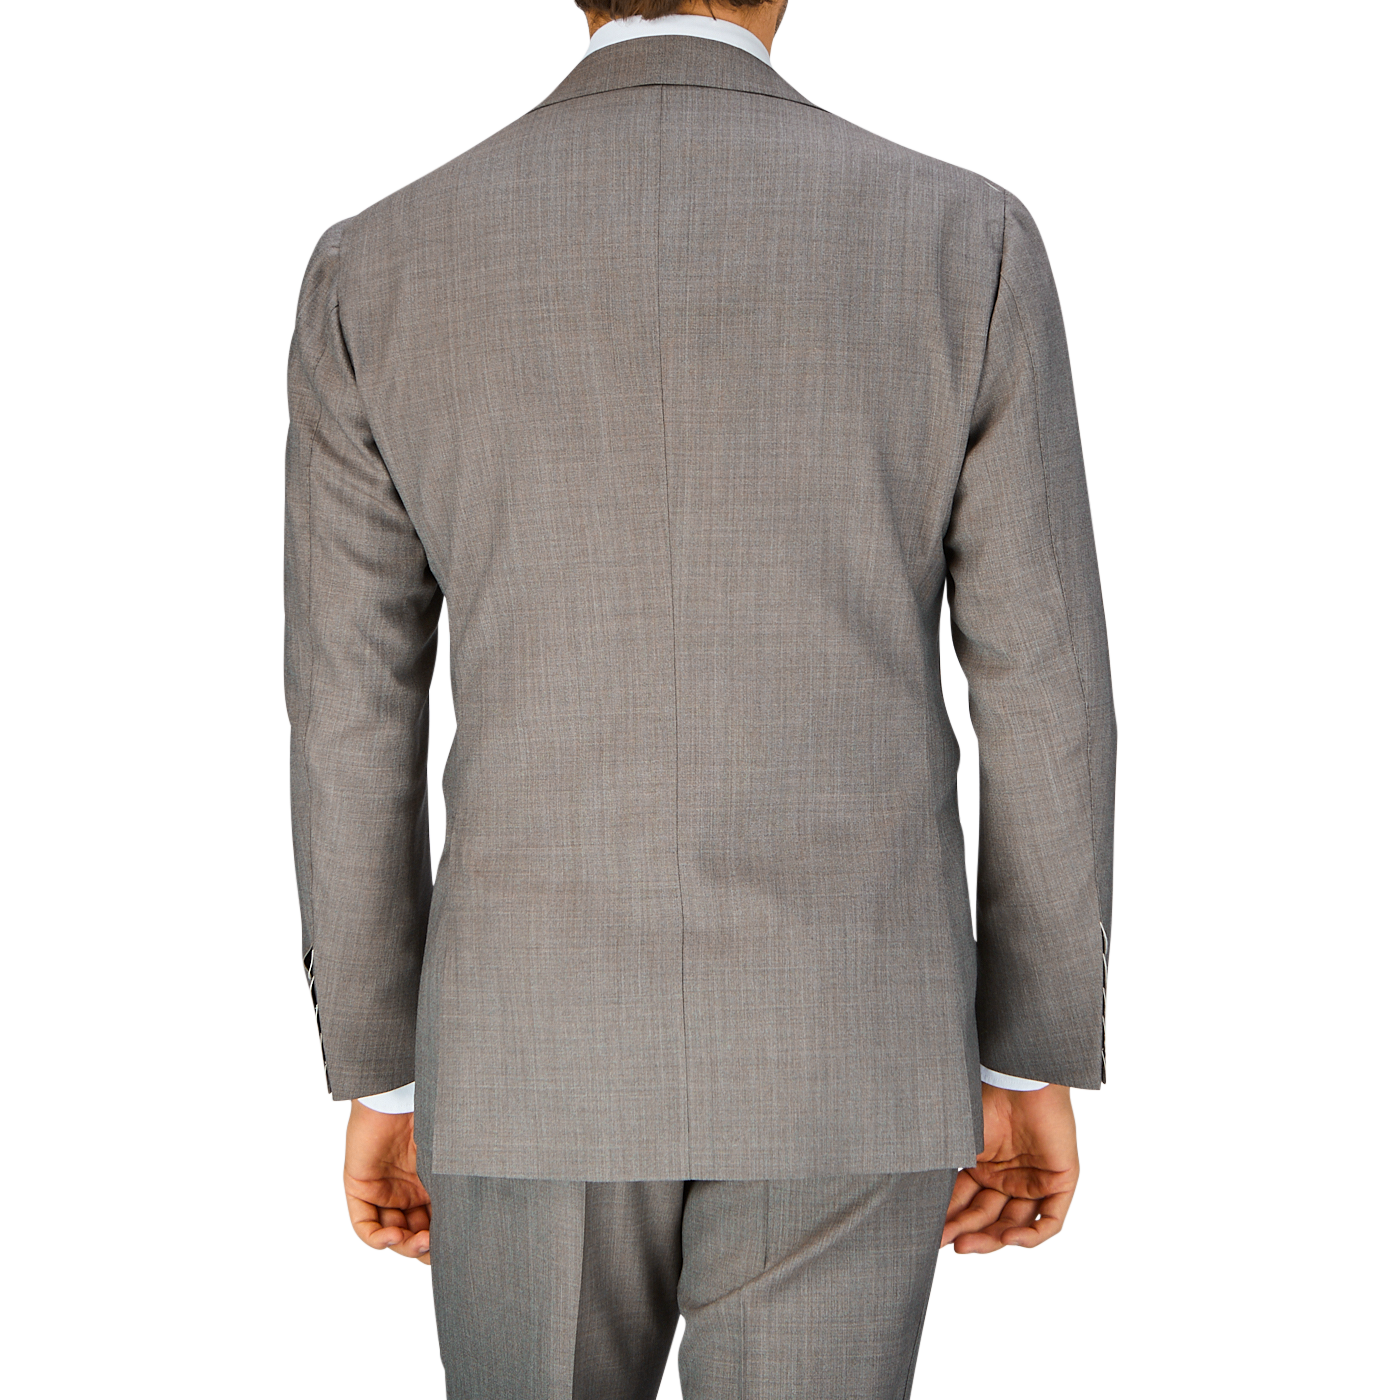 A man viewed from behind wearing a Mid Grey High-Twist Wool Ring Jacket suit jacket and pants.